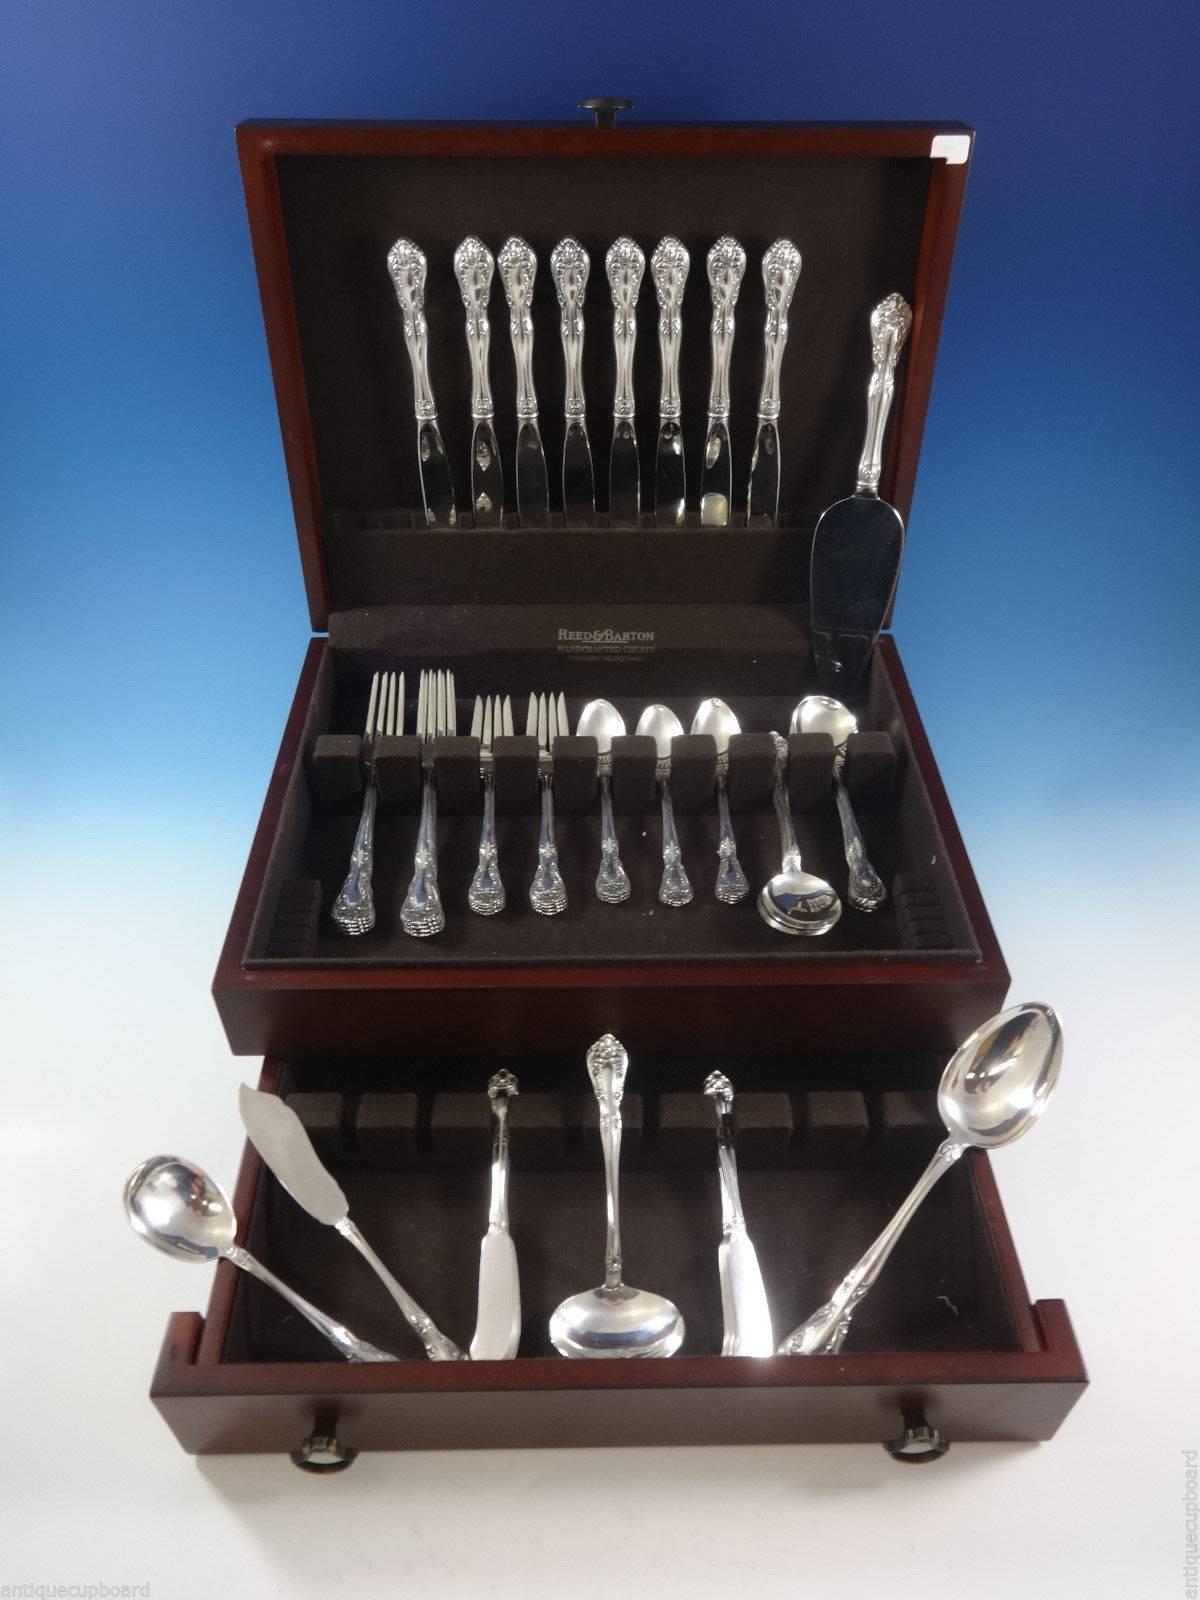 Chateau Rose by Alvin sterling silver flatware set, 53 pieces. This set includes: 

Eight knives, 8 7/8